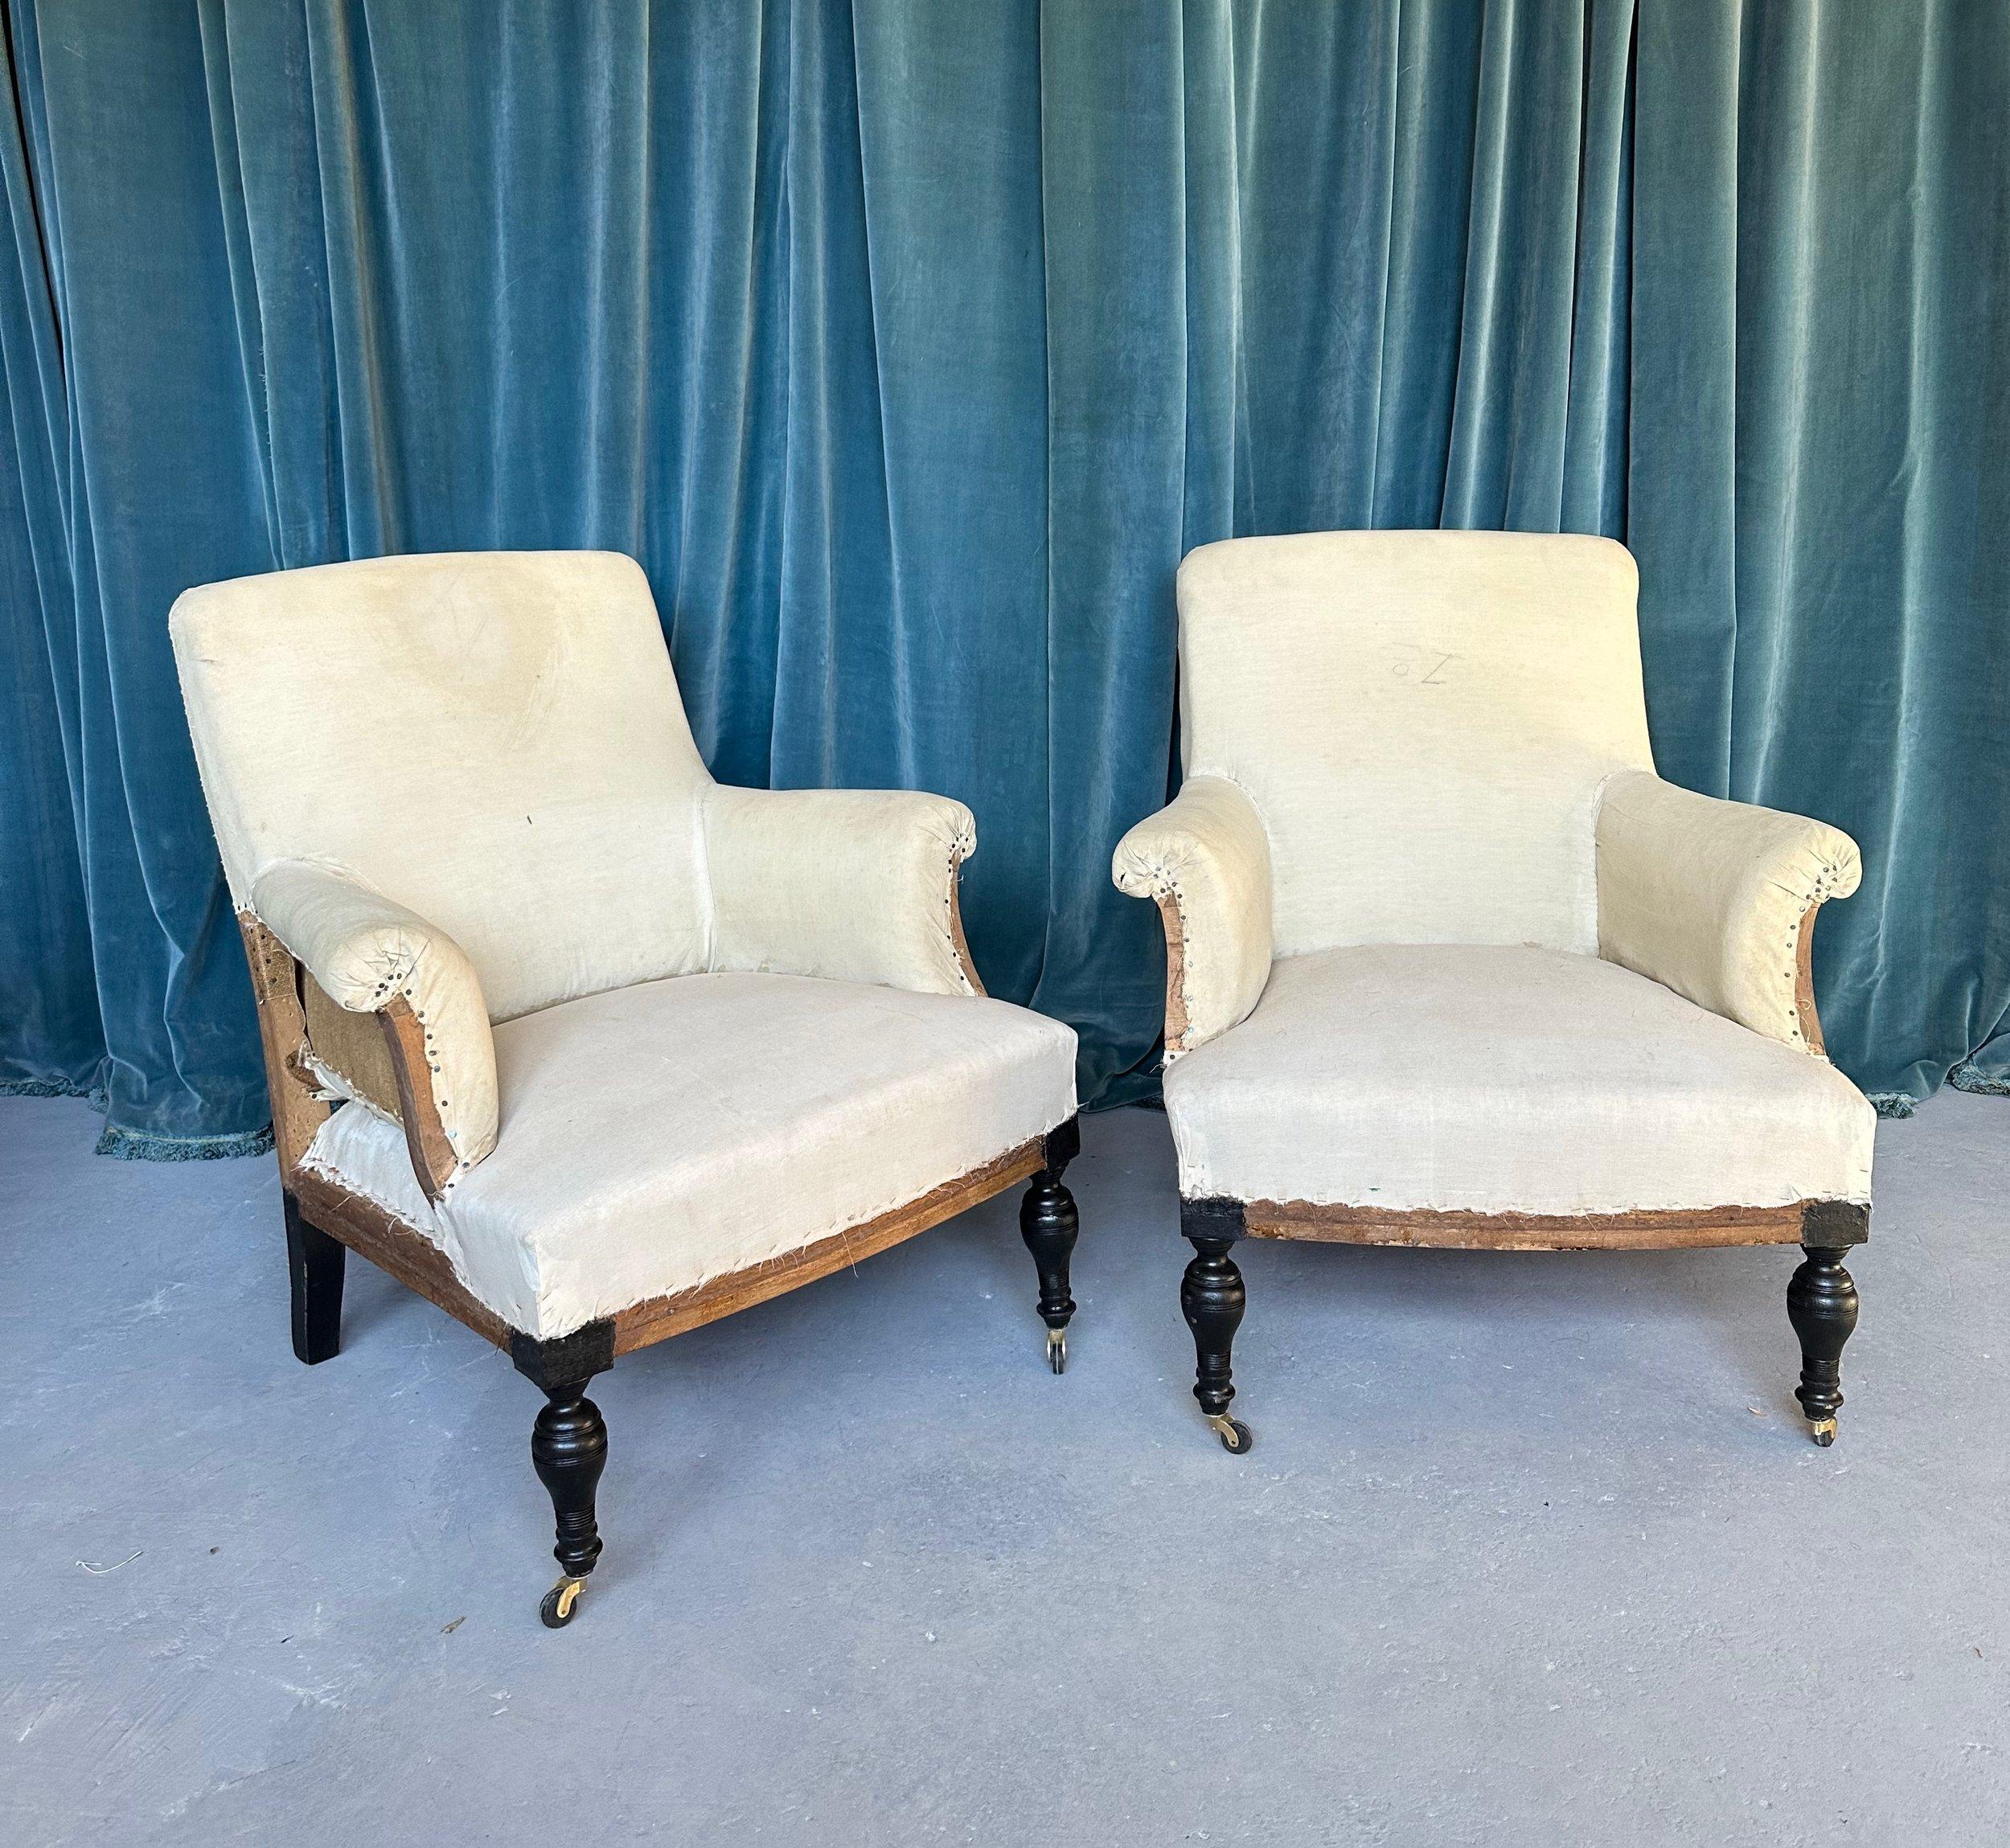 A very unique pair of French 19th century armchairs with straight untufted backs and scrolled arms, and simple untufted seats. The armchairs have unusual turned legs that have been recently fitted with new casters to accentuate the pitch and to make